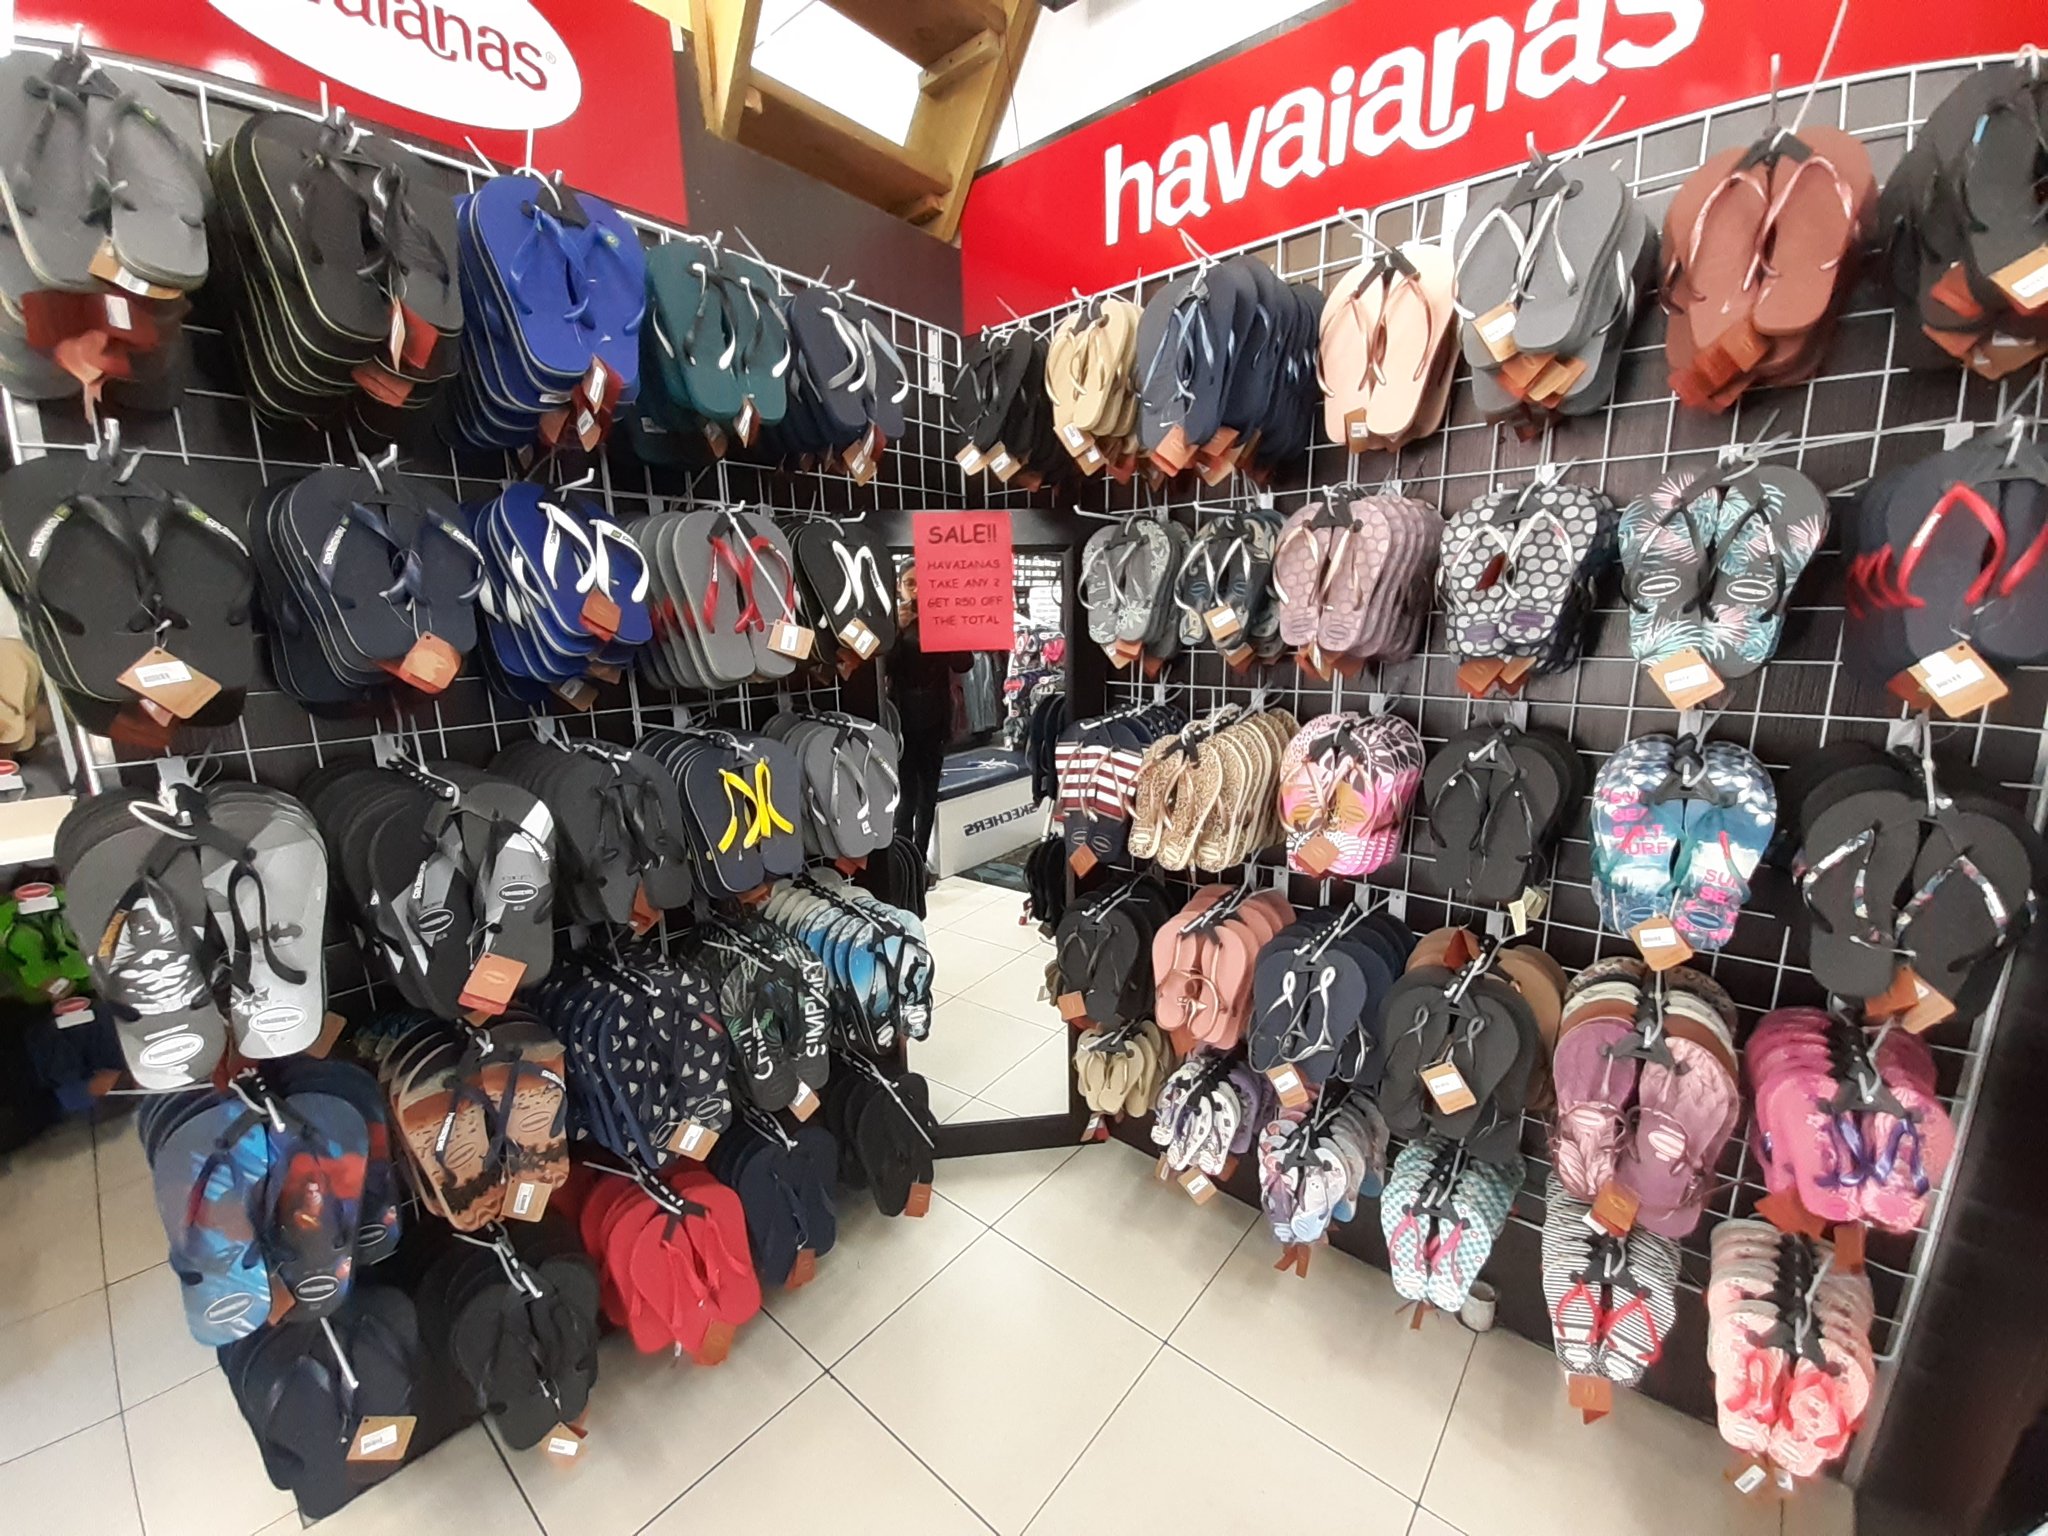 Access Park CPT on X: Get your #Havaianas today! Available at